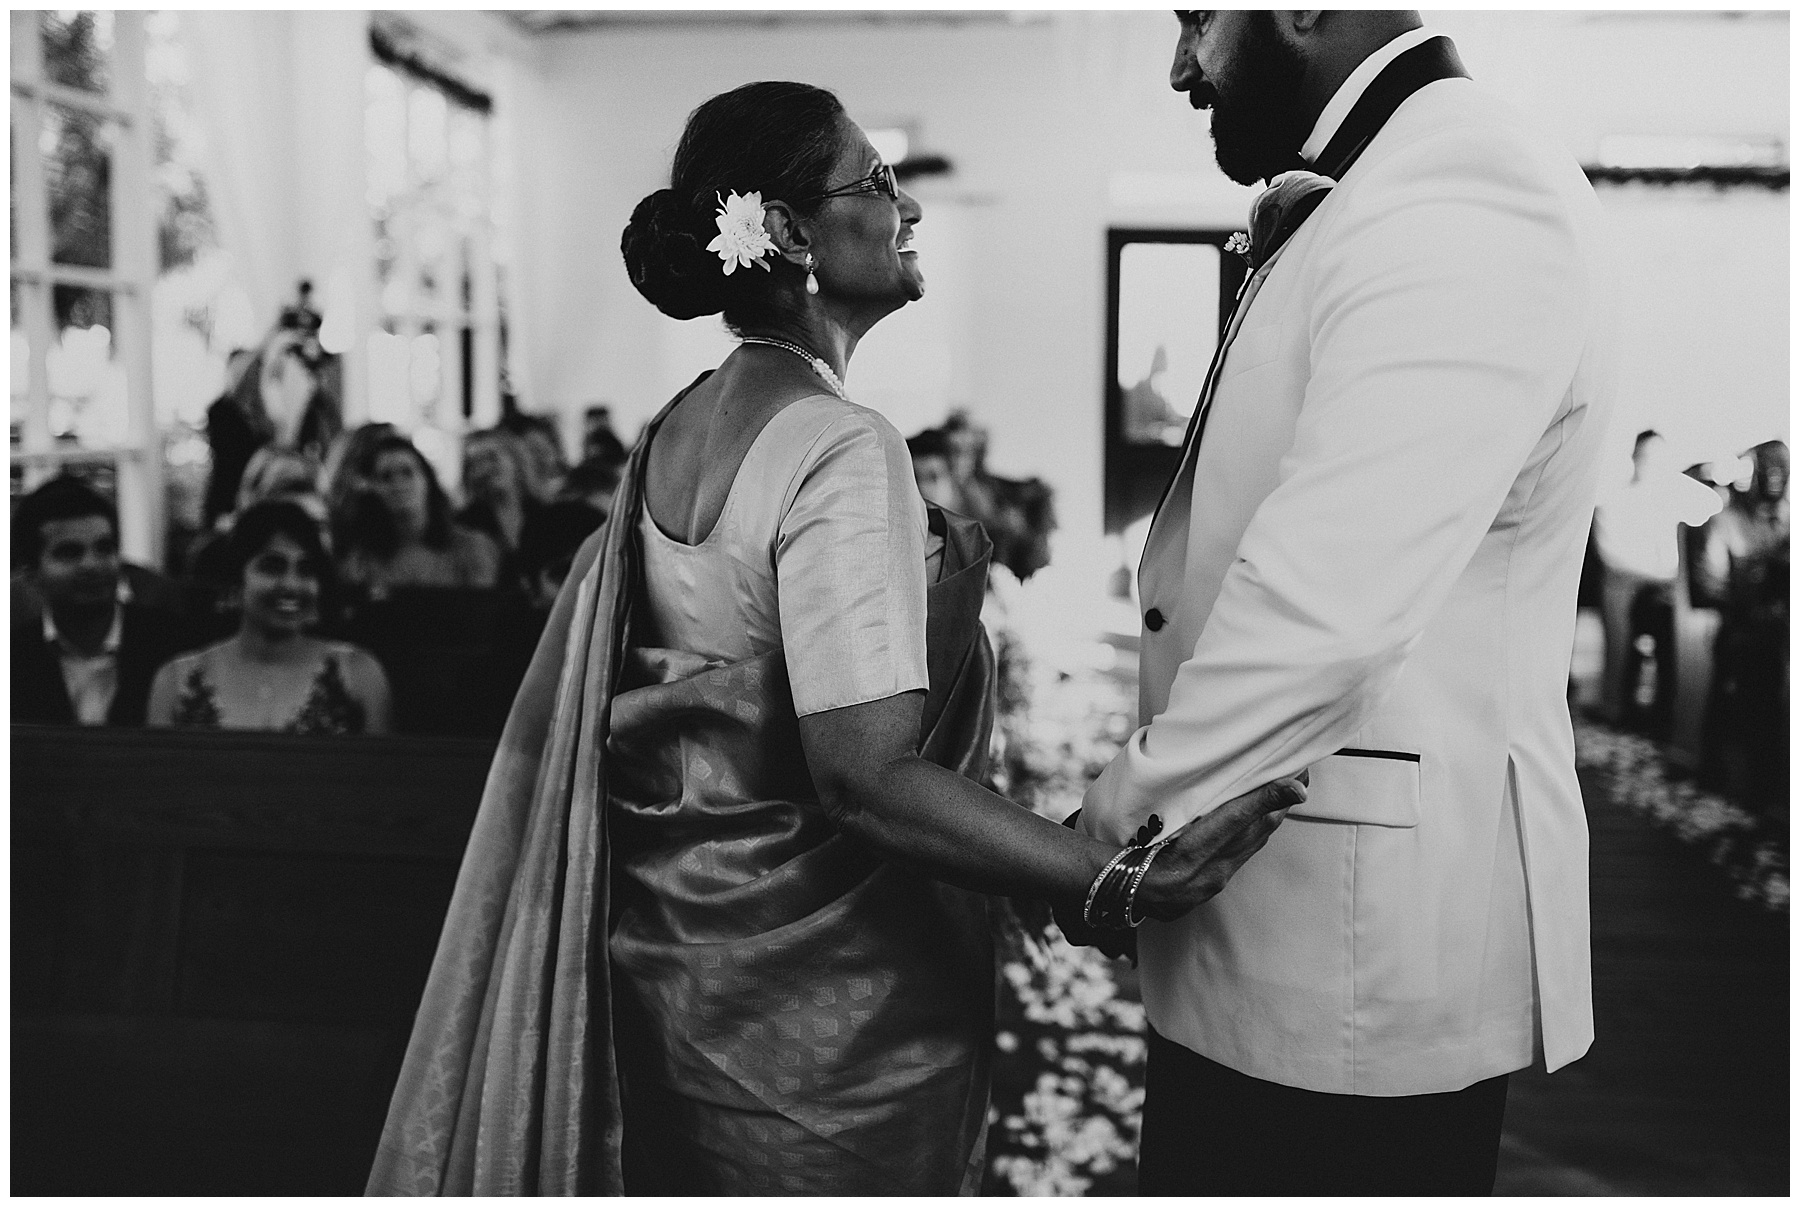 Multi cultural wedding at Cross Creek Ranch, in Dover Florida - Photographed by Juju Photography - Destination wedding photographer